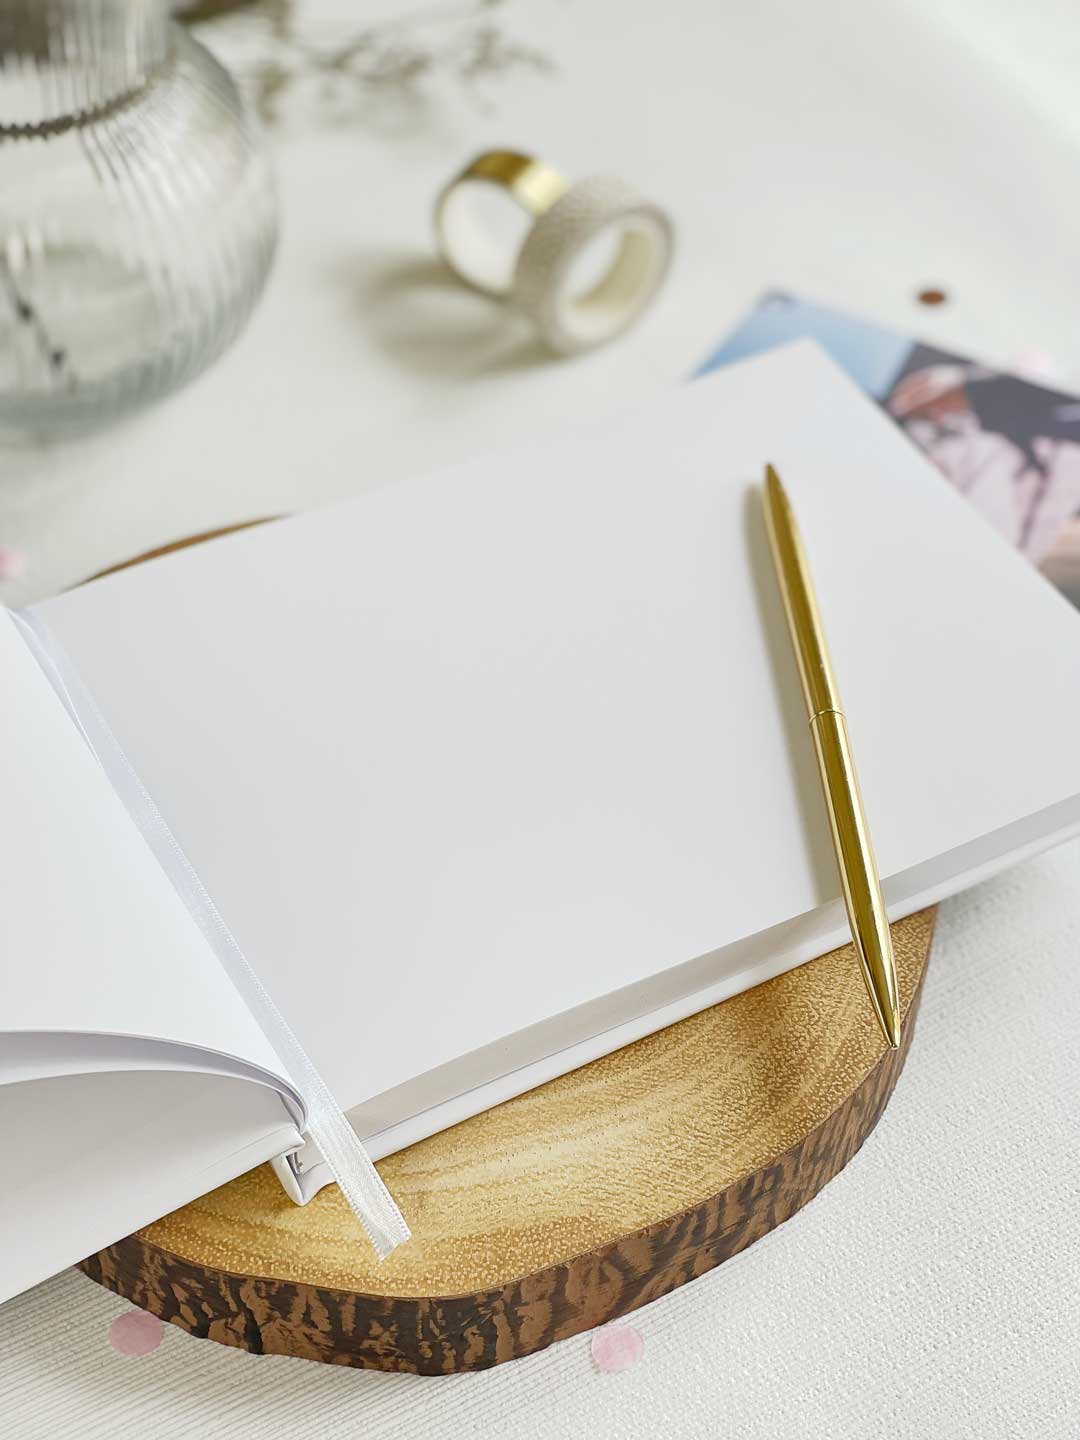 8 Unique Ways to Fill Your Personalised Memory Book